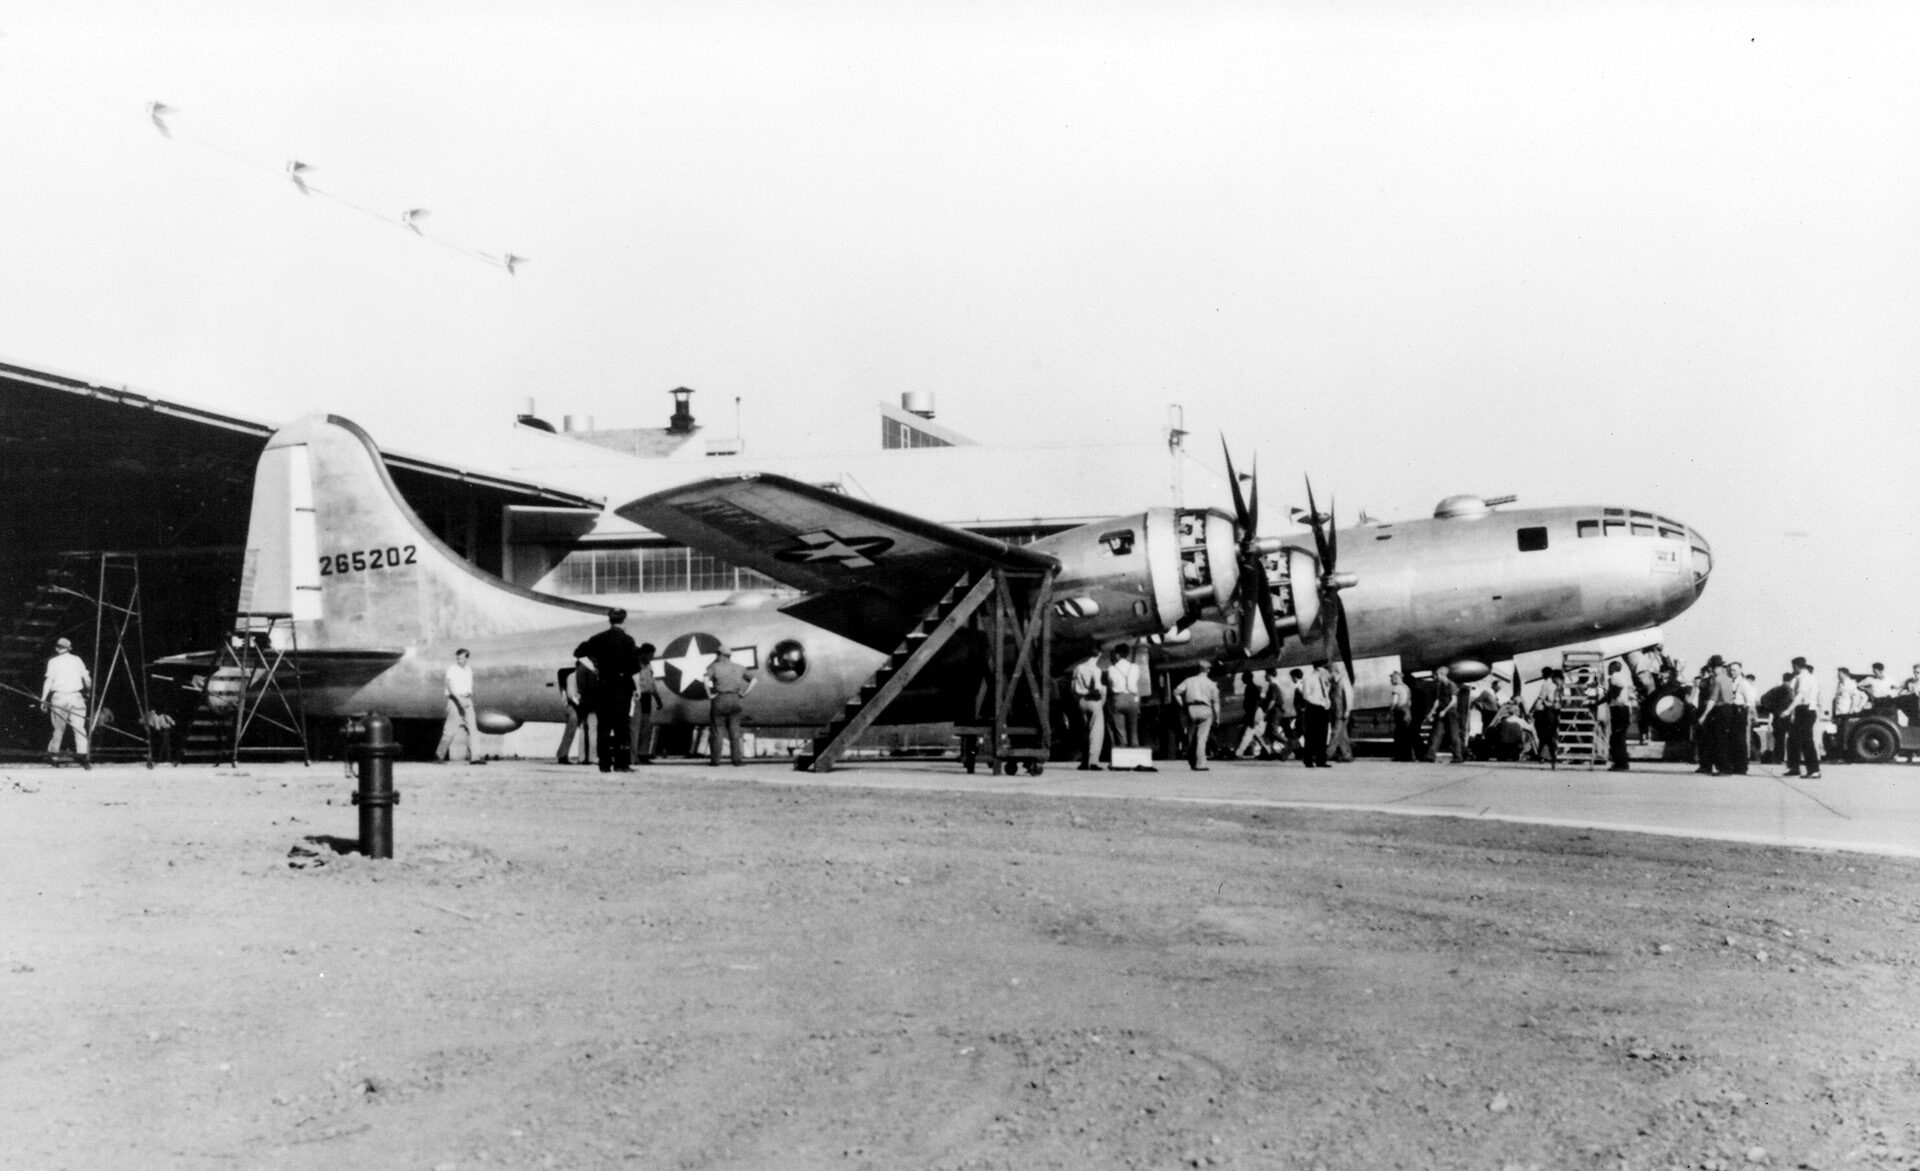 The first B-29 is rolled out of the Glen L. Martin-Nebraska Bomber Plant on May 24, 1944. The nose of the plane was raised to lower the tail and allow it to pass under the canopy doors.